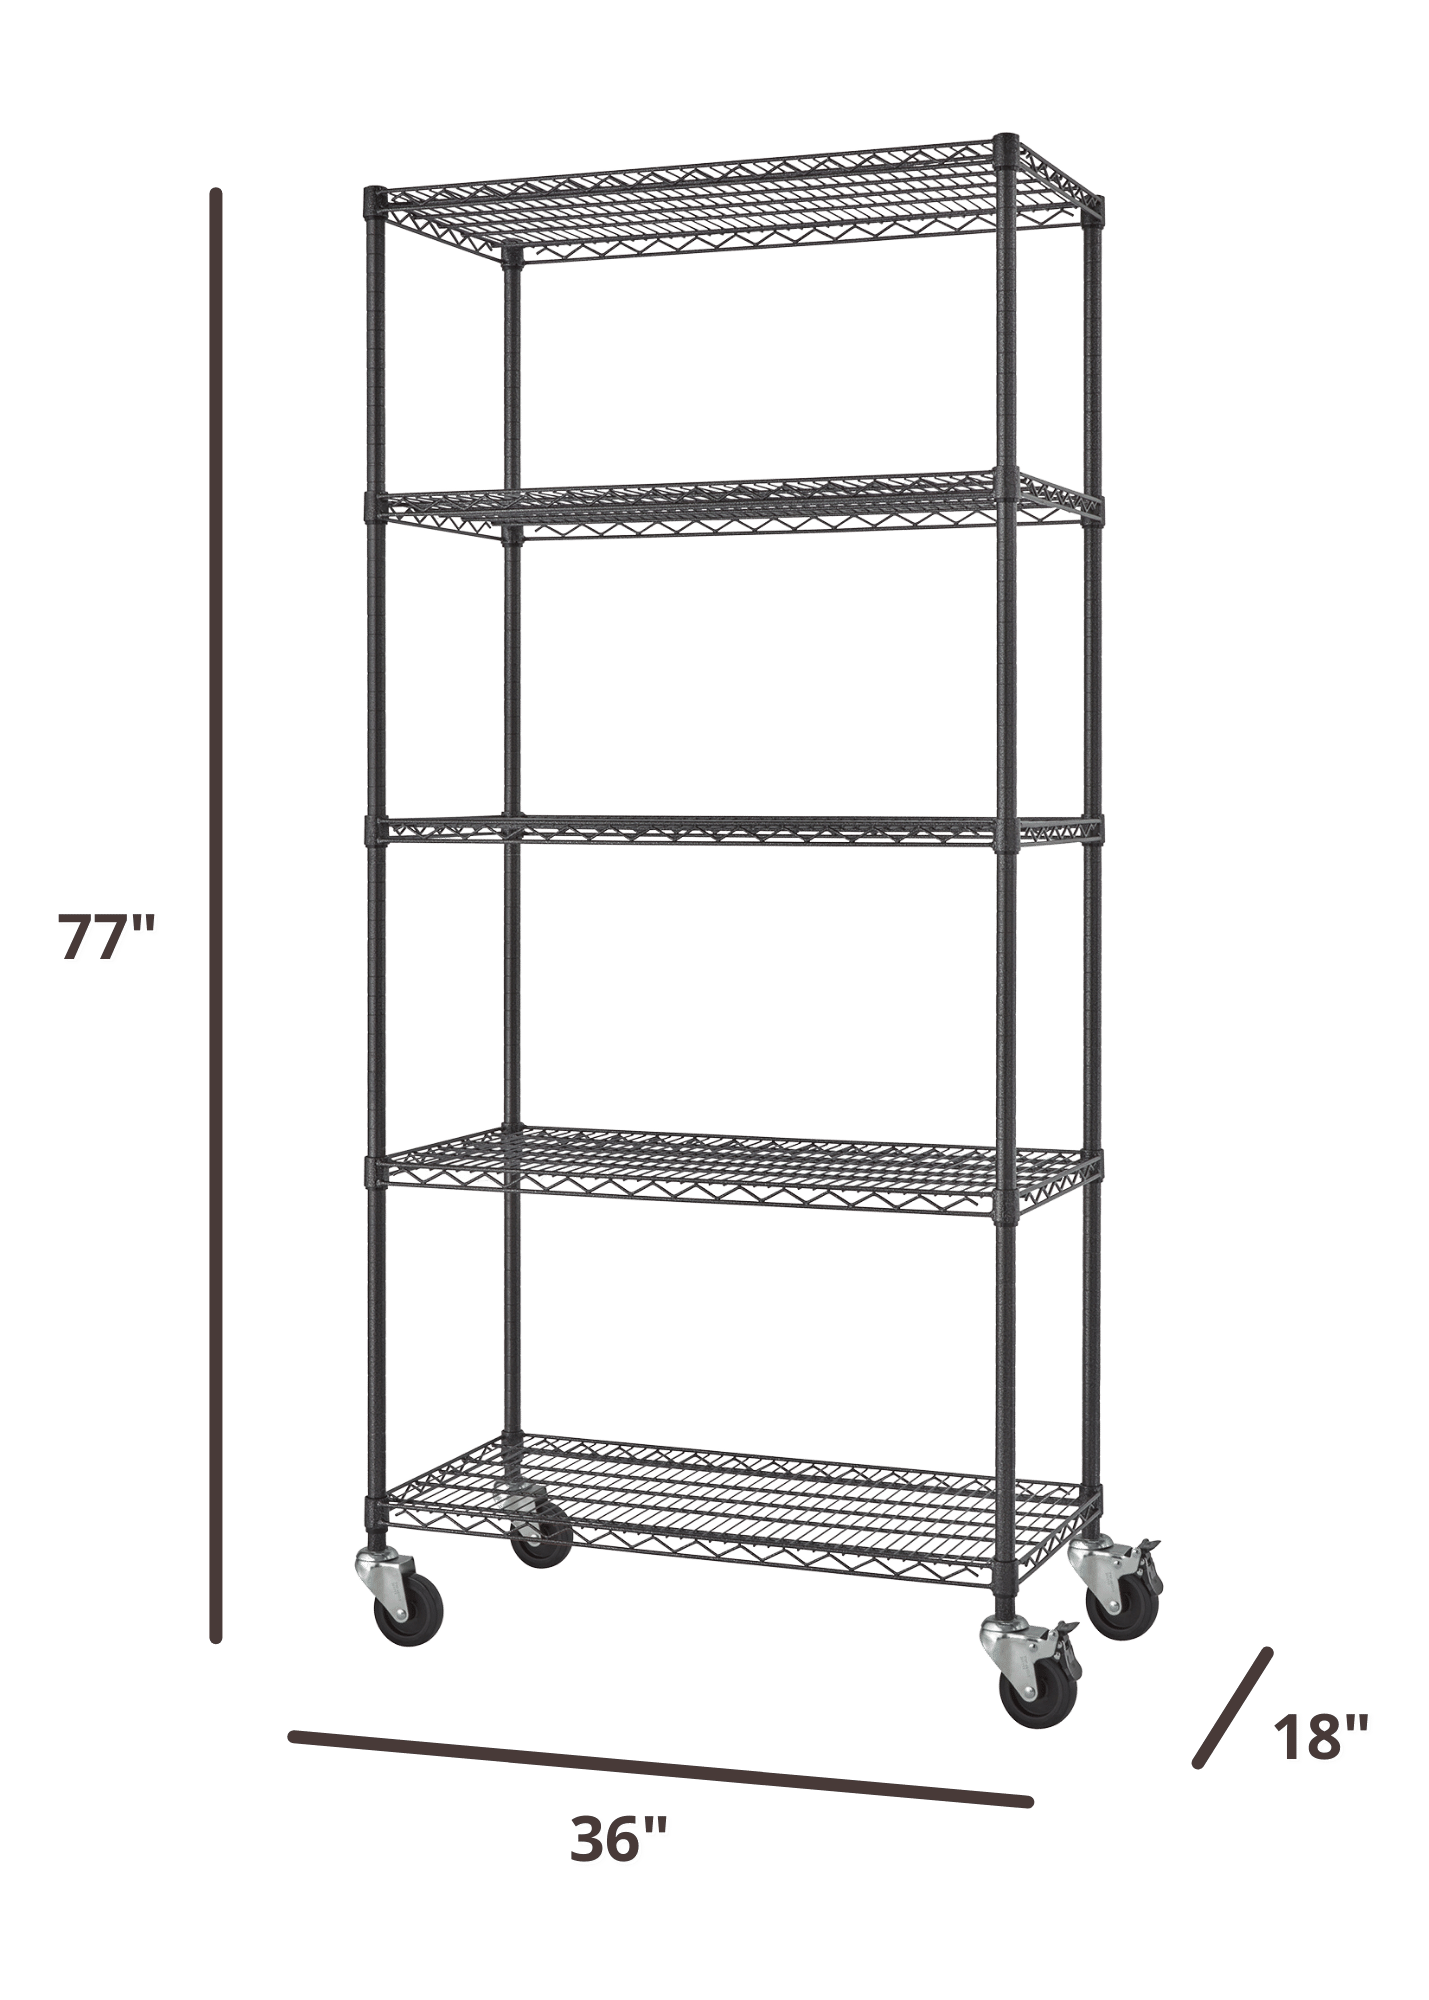 77 inches tall by 36 inches black wire shelving rack with 5 shelves and wheels